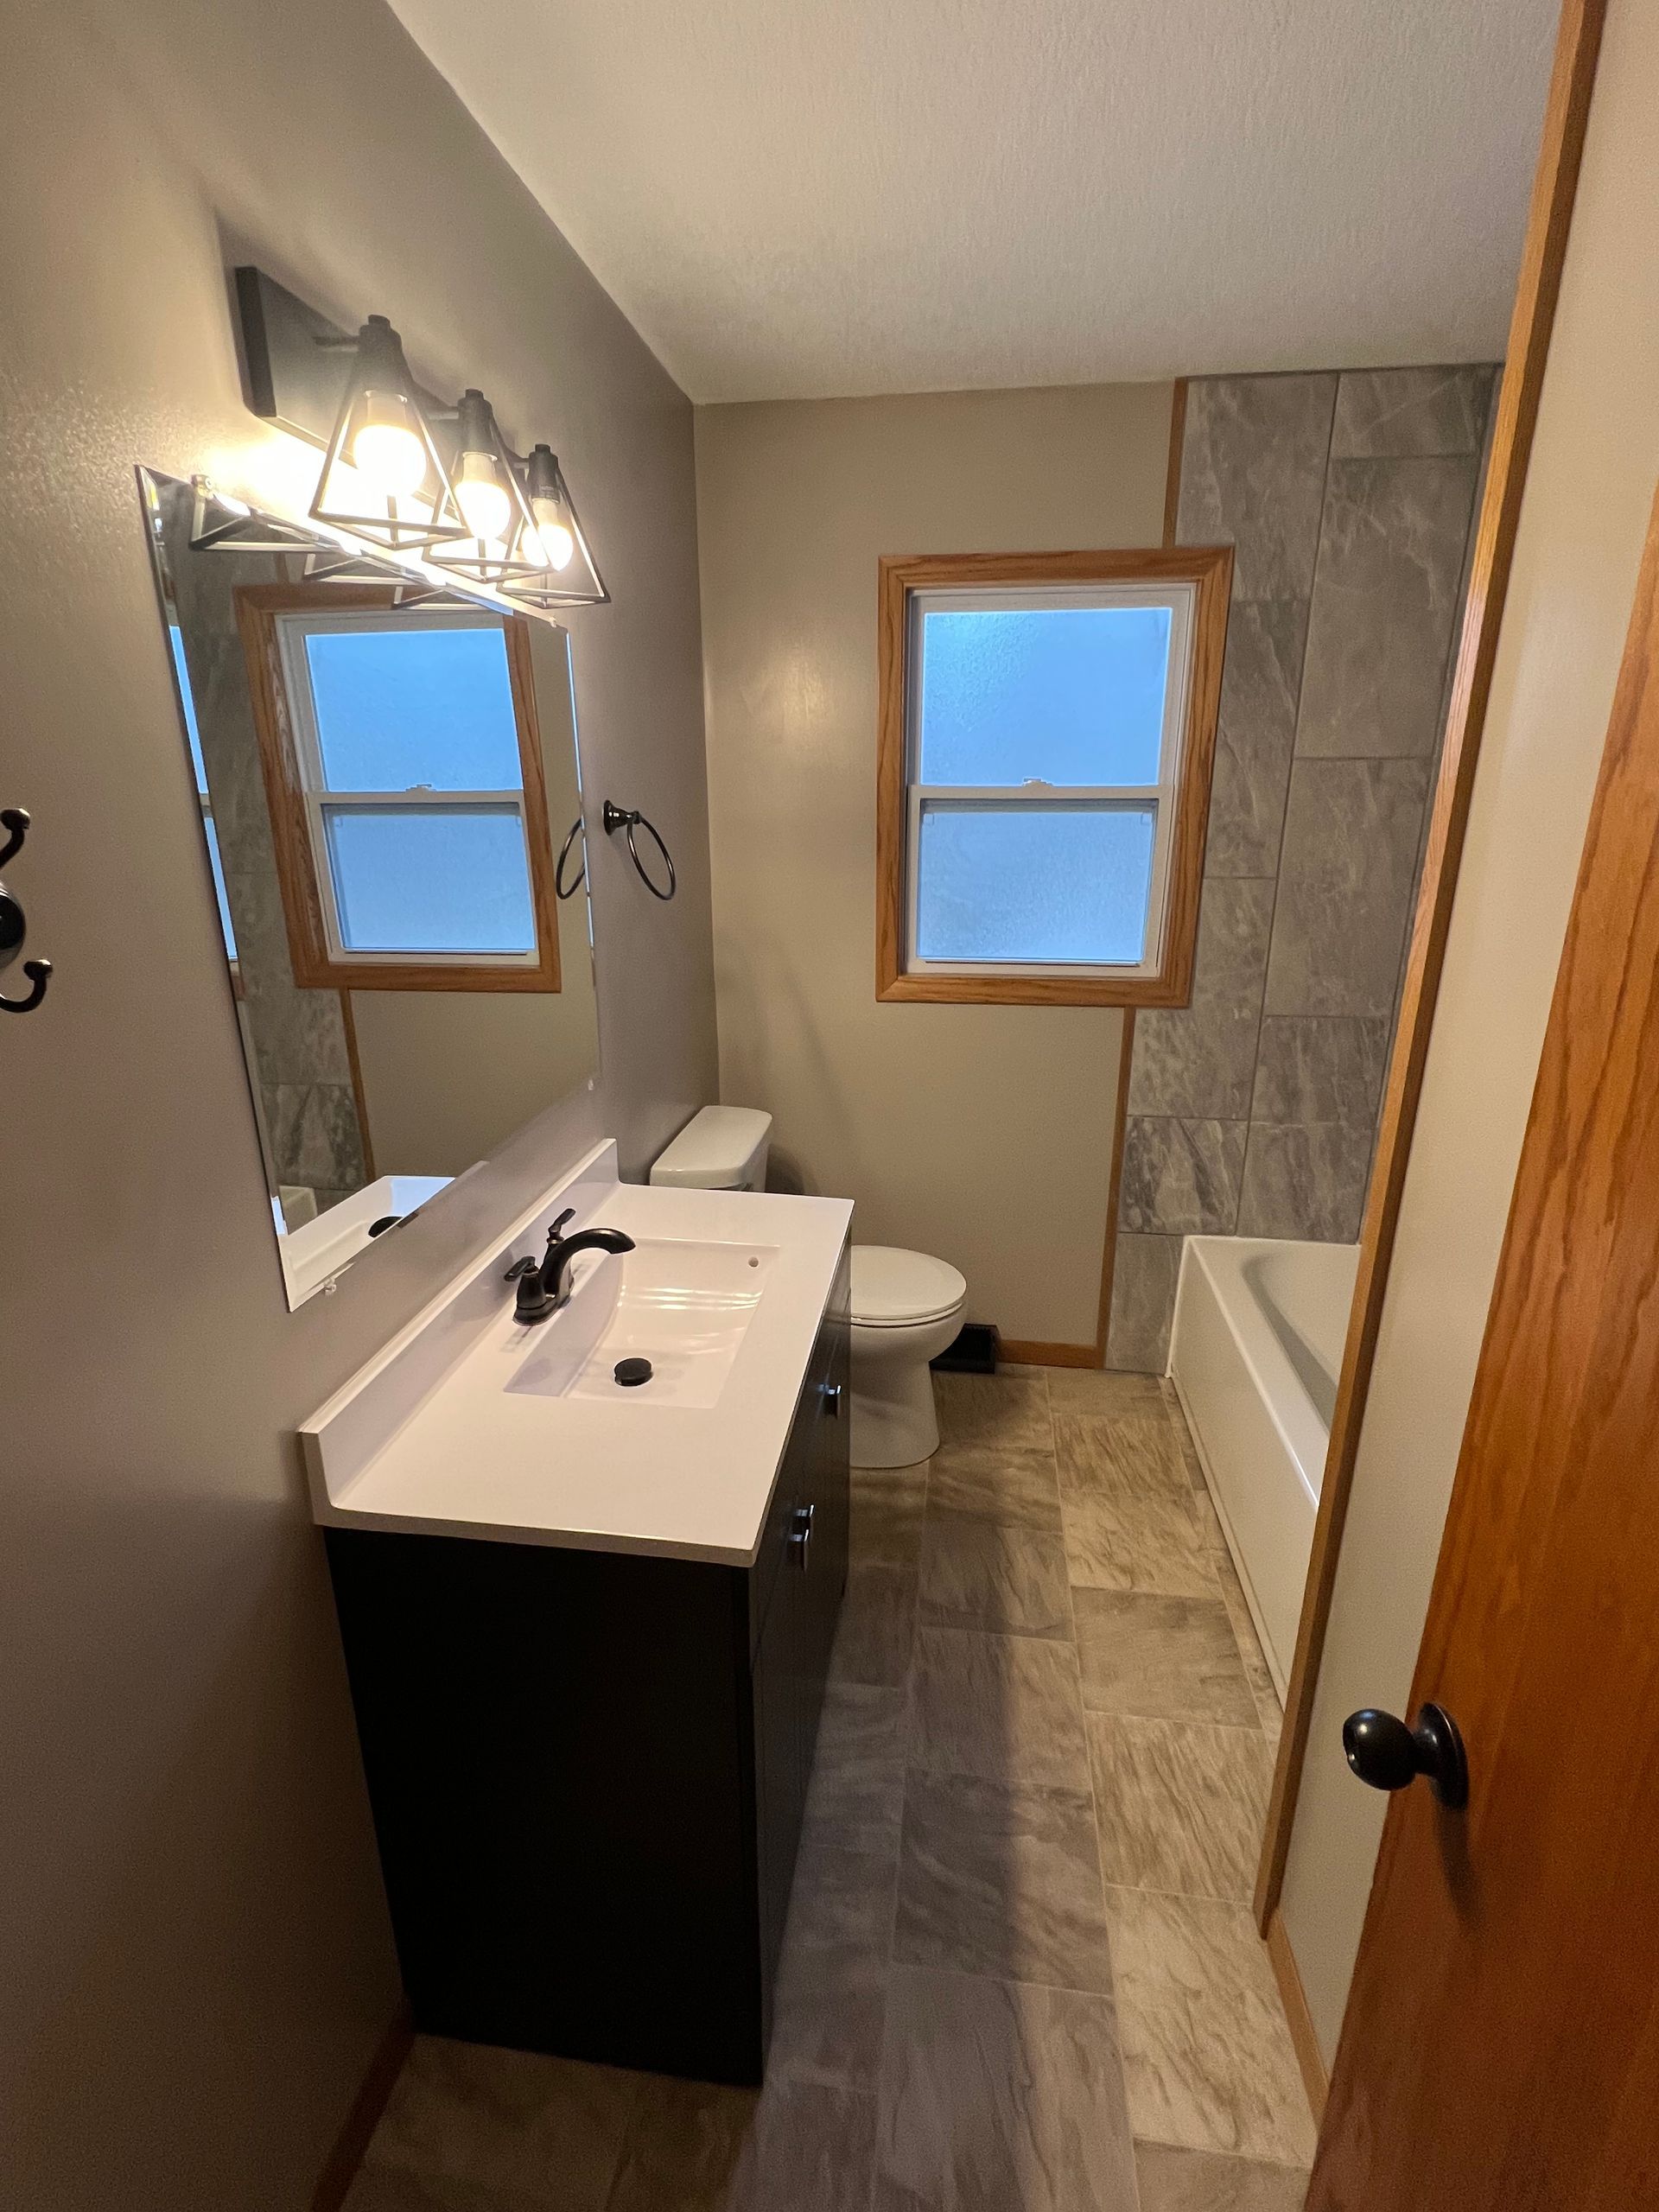 A bathroom with a sink , toilet , tub and mirror.